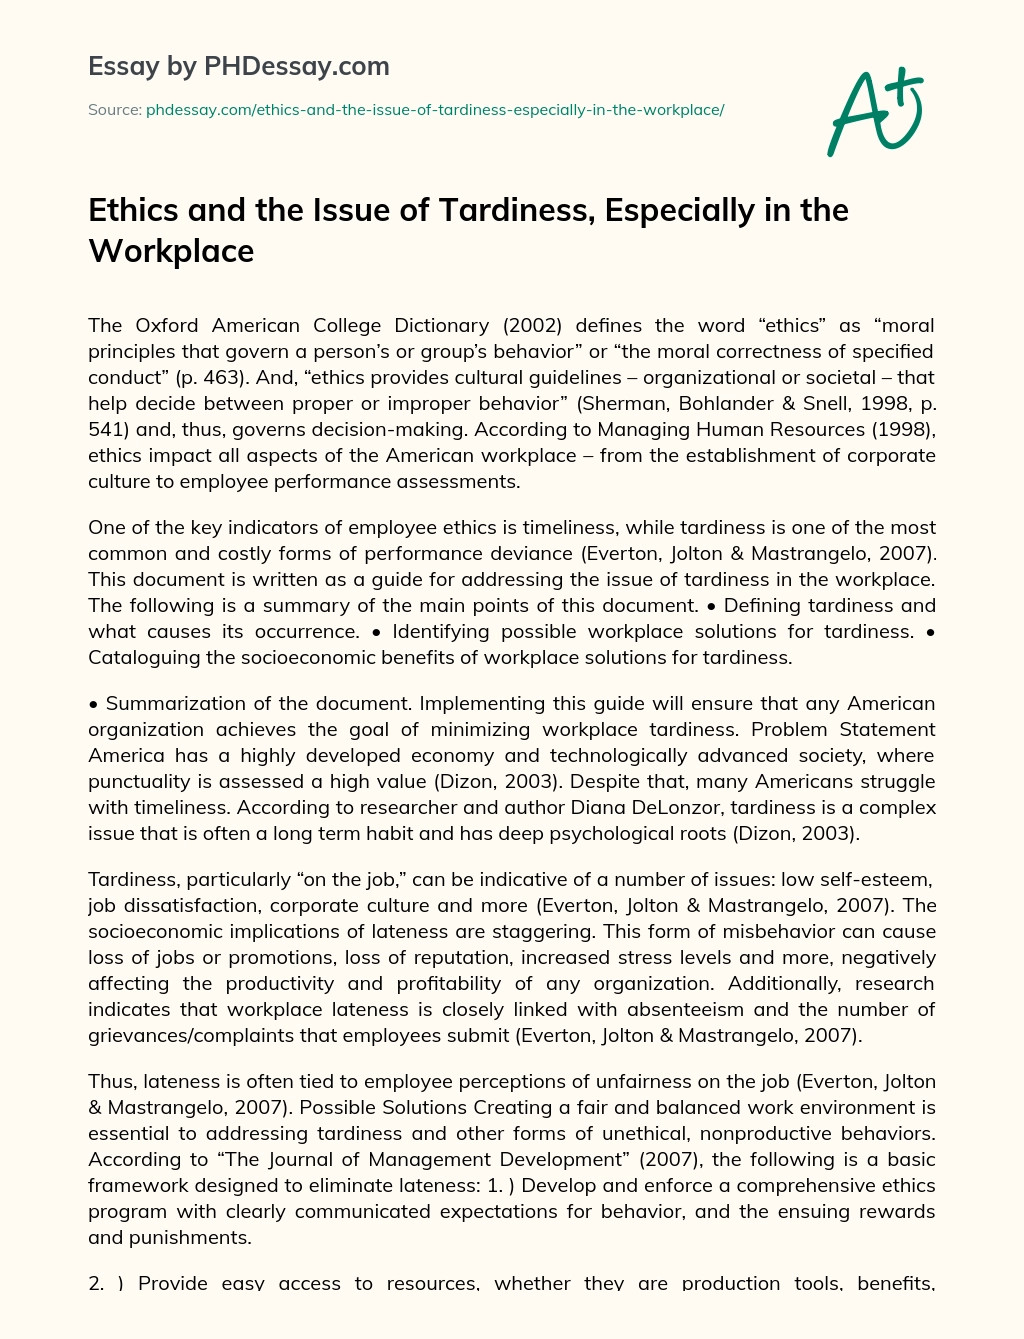 Ethics and the Issue of Tardiness, Especially in the Workplace essay